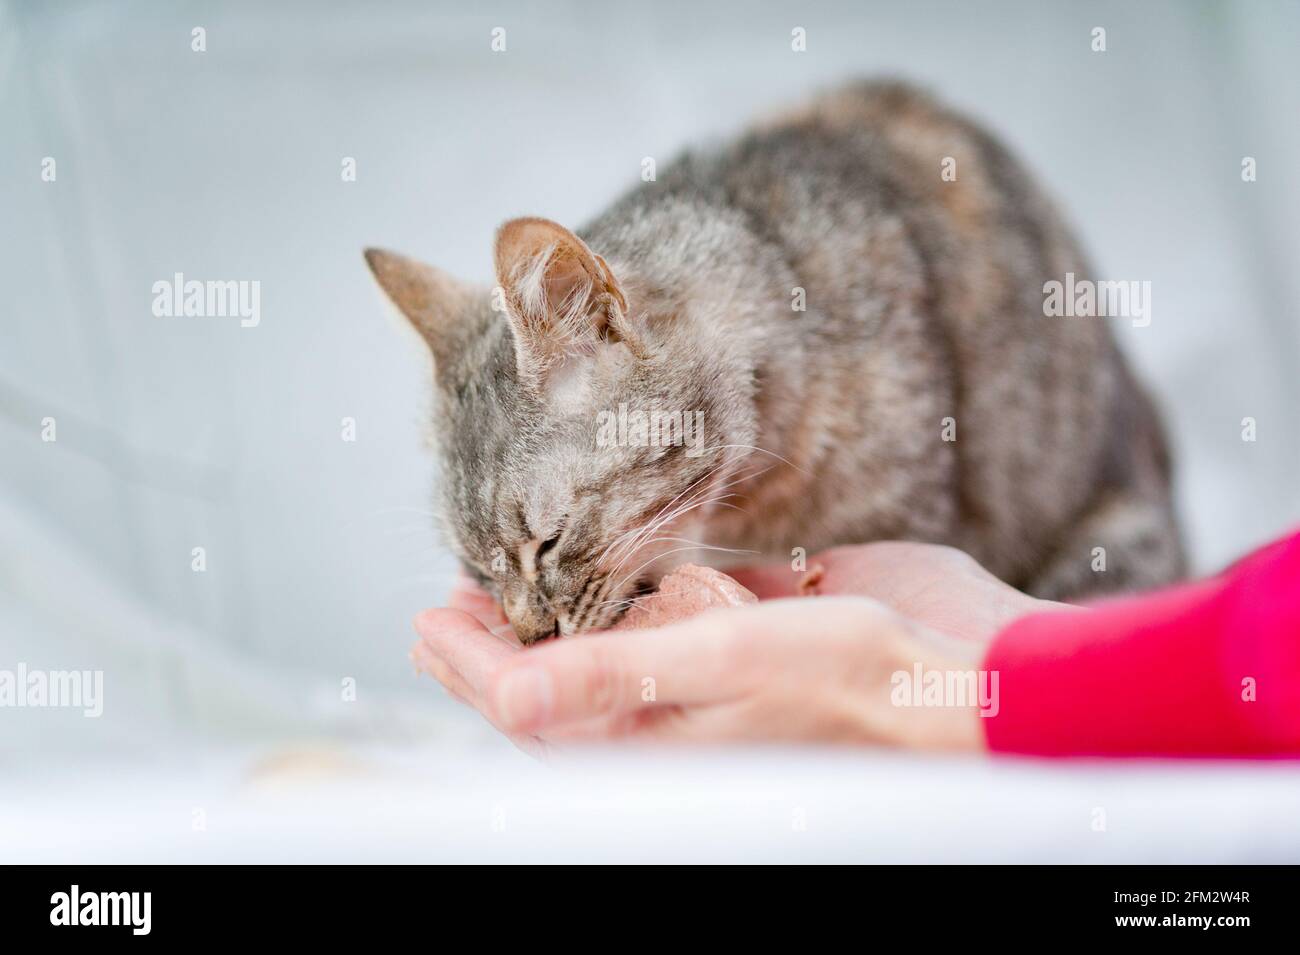 Hungry stray cat eating cat food from arms Stock Photo